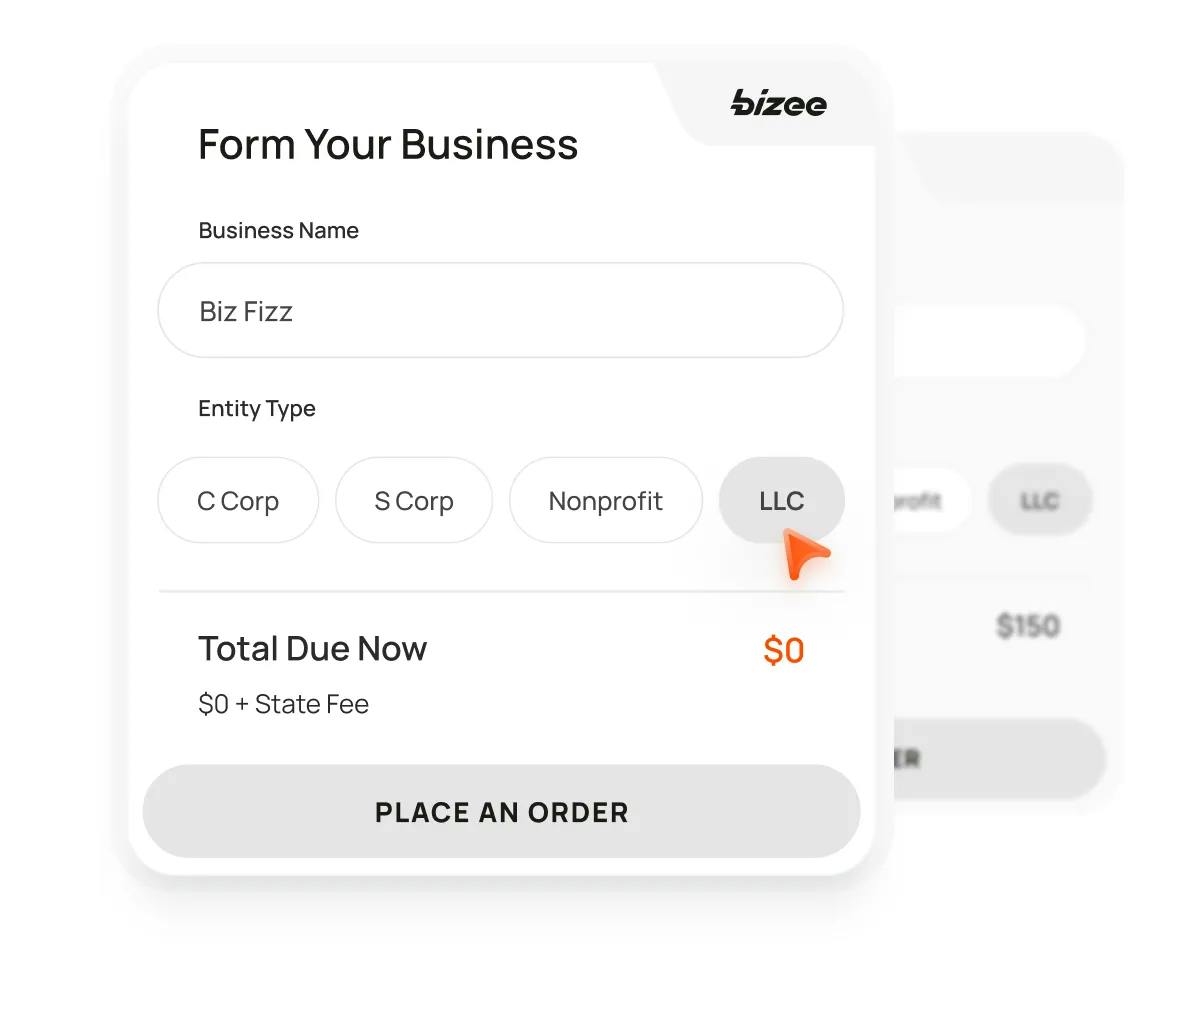 Form your business